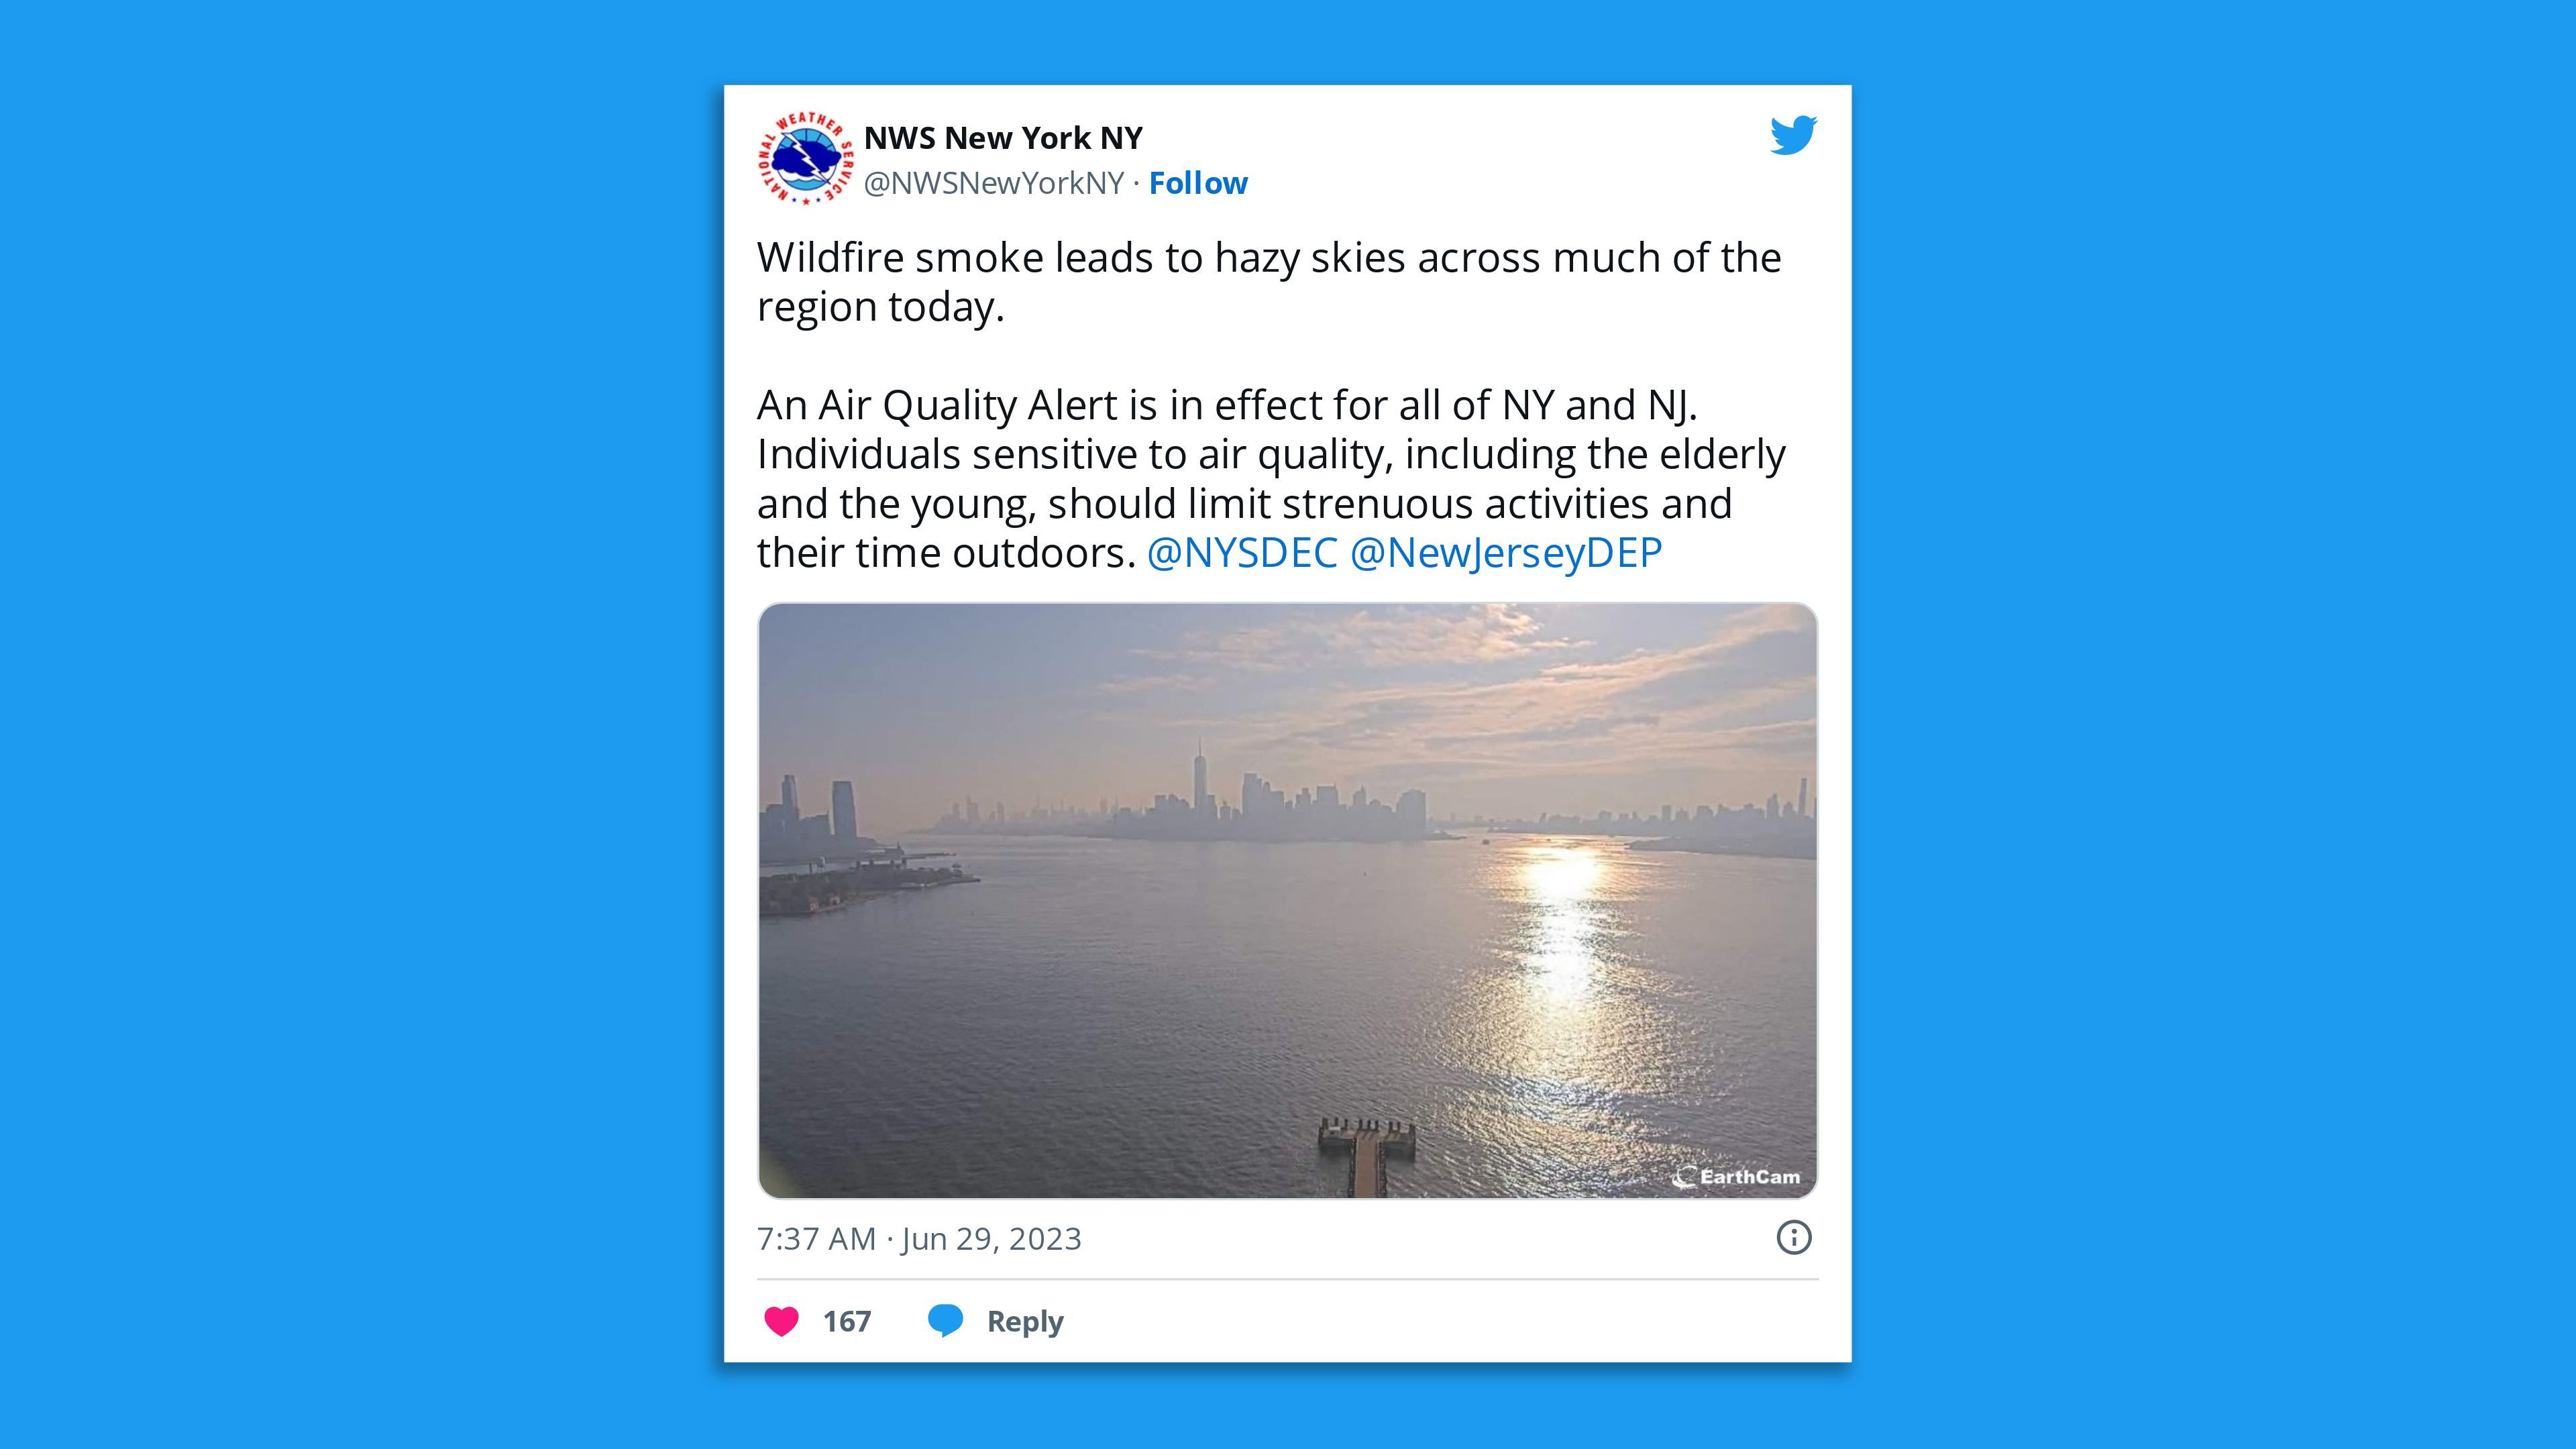 A screenshot of an NWS tweet, saying: "Wildfire smoke leads to hazy skies across much of the region today.  An Air Quality Alert is in effect for all of NY and NJ. Individuals sensitive to air quality, including the elderly and the young, should limit strenuous activities and their time outdoors."